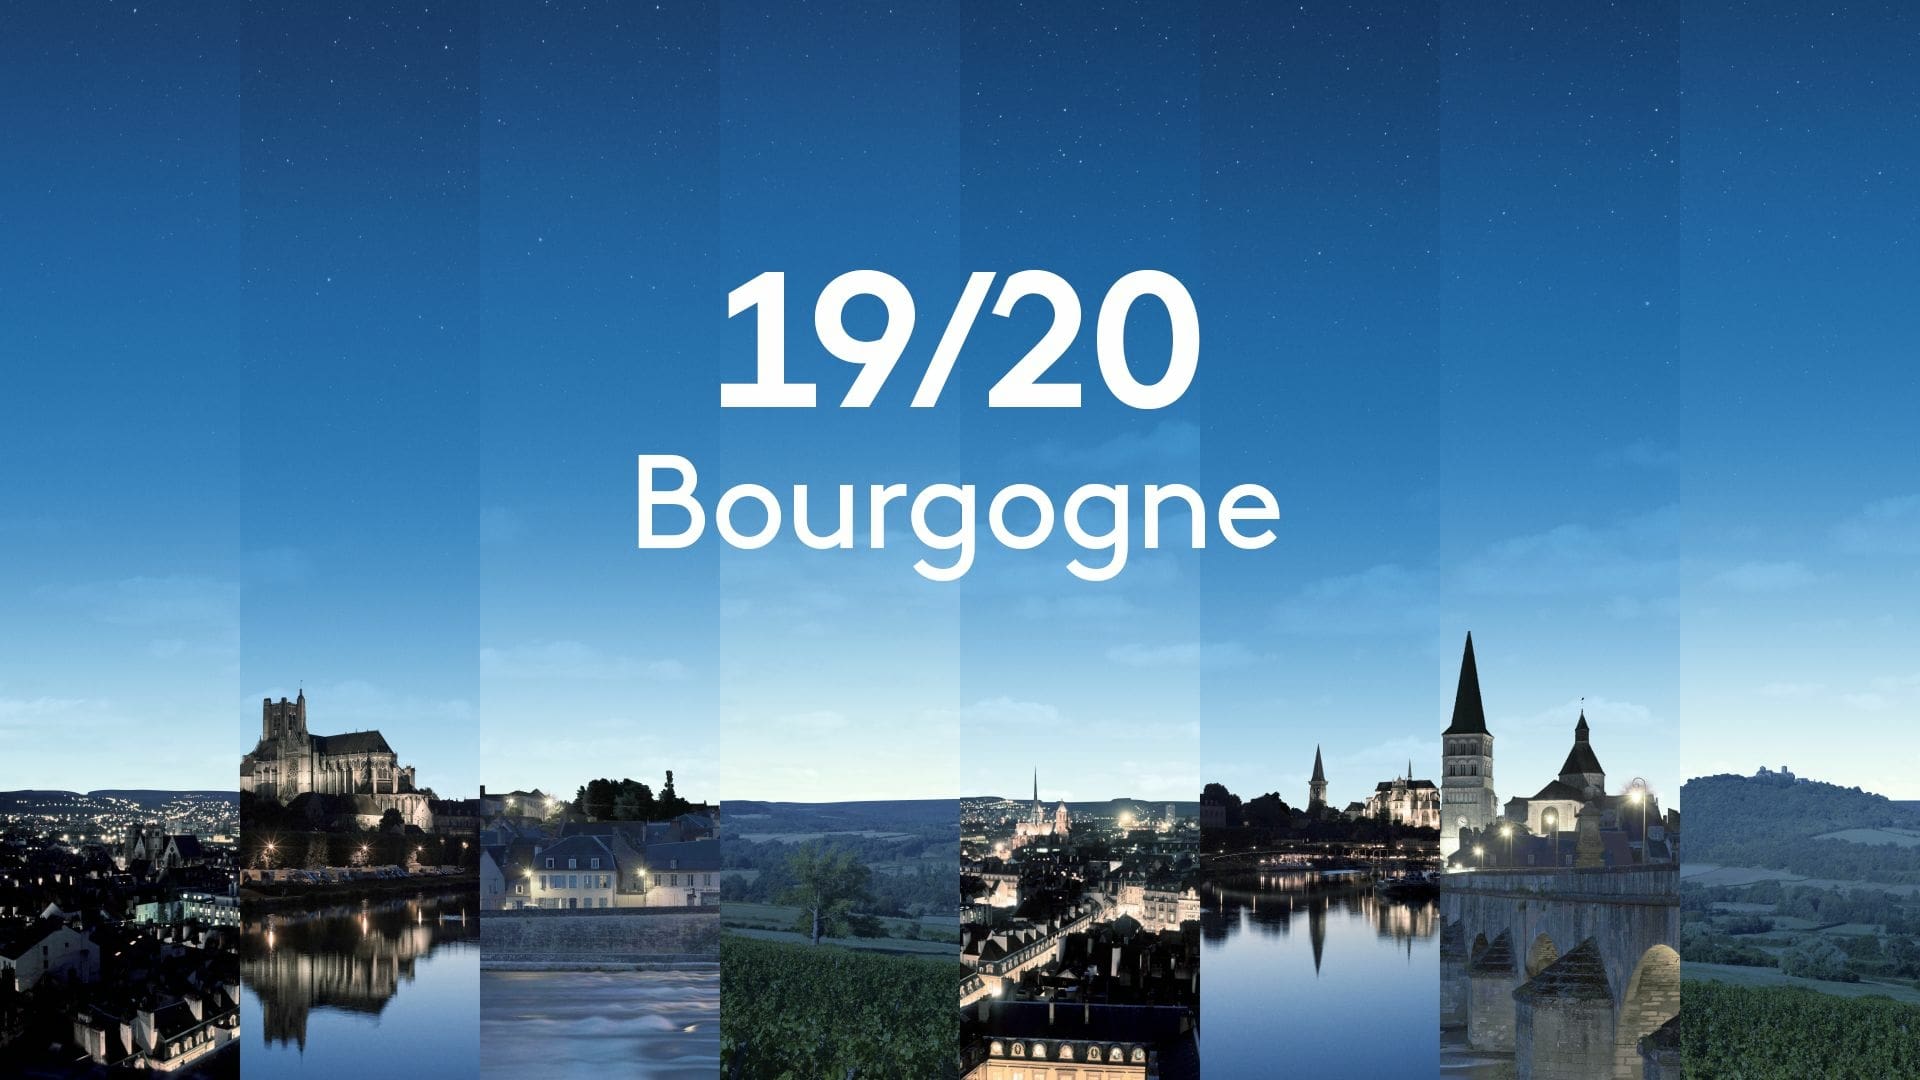 19/20 France 3 Bourgogne of Thursday 12 January 2023 – Launch of the National Plan to prevent falls in the BFC region